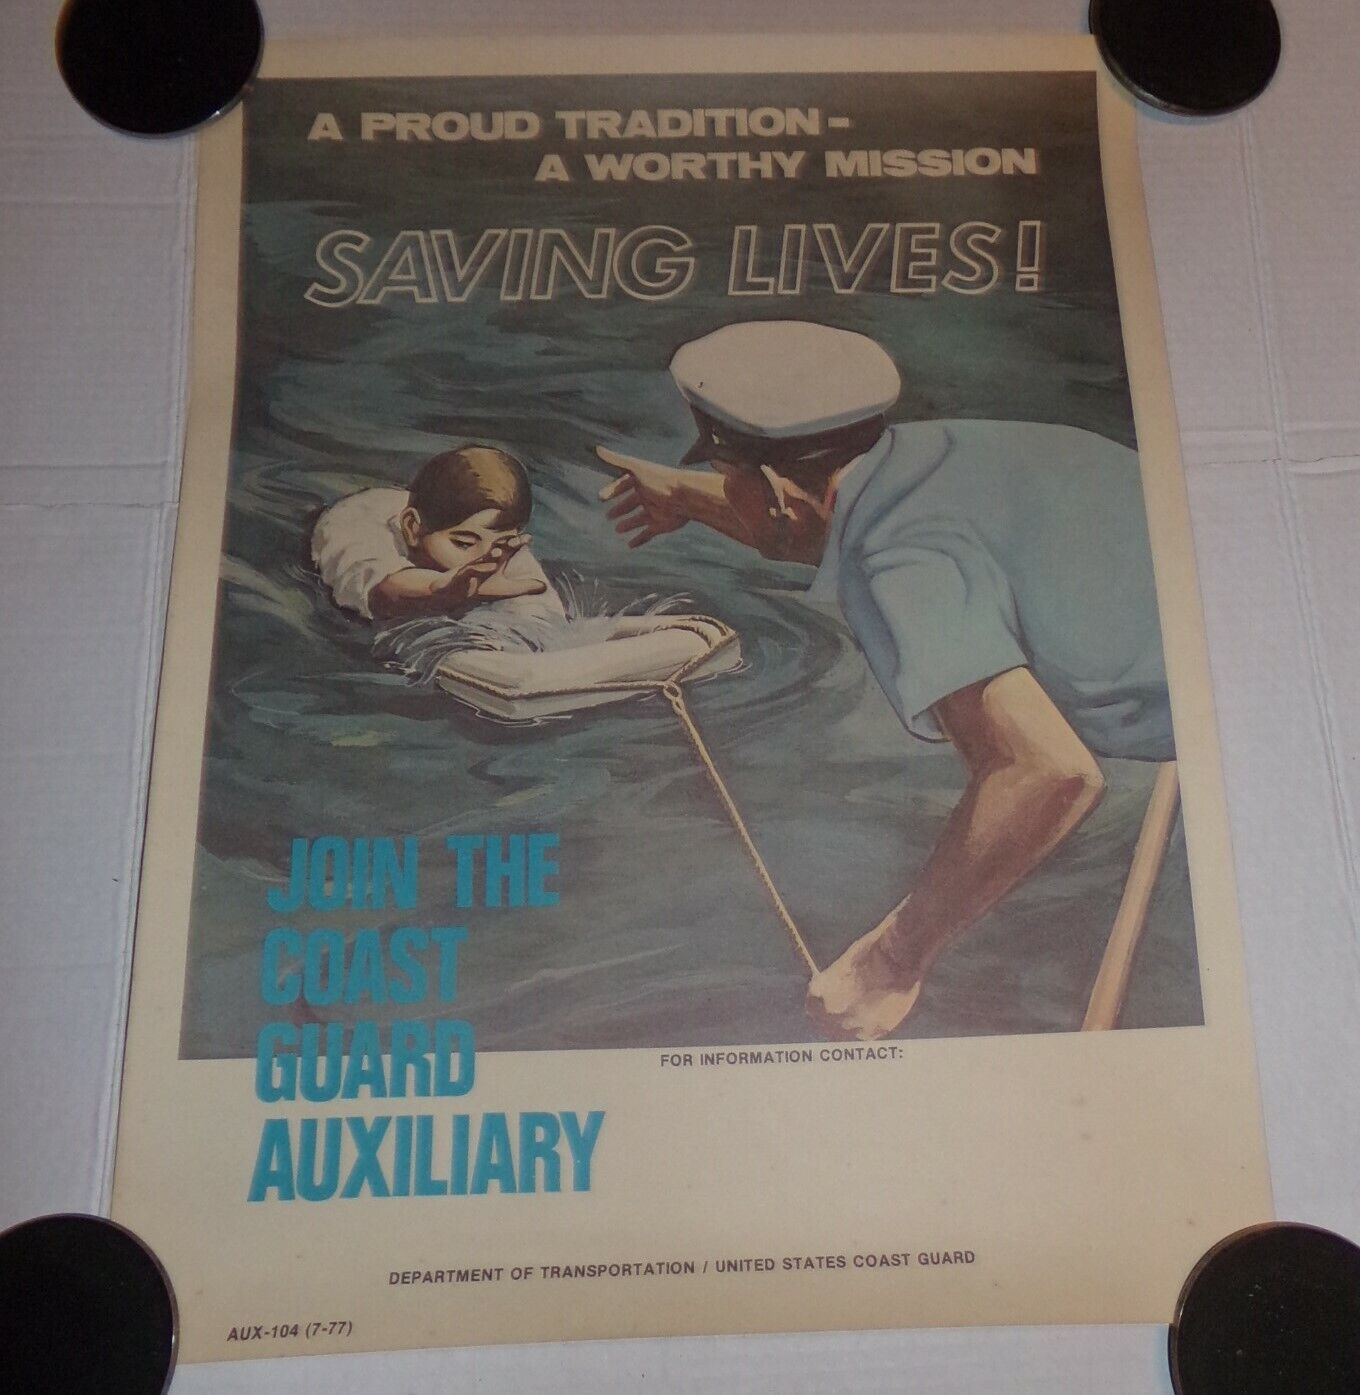 Original Vintage 1970's Auxiliary Coast Guard Recruiting Poster Saving Lives 